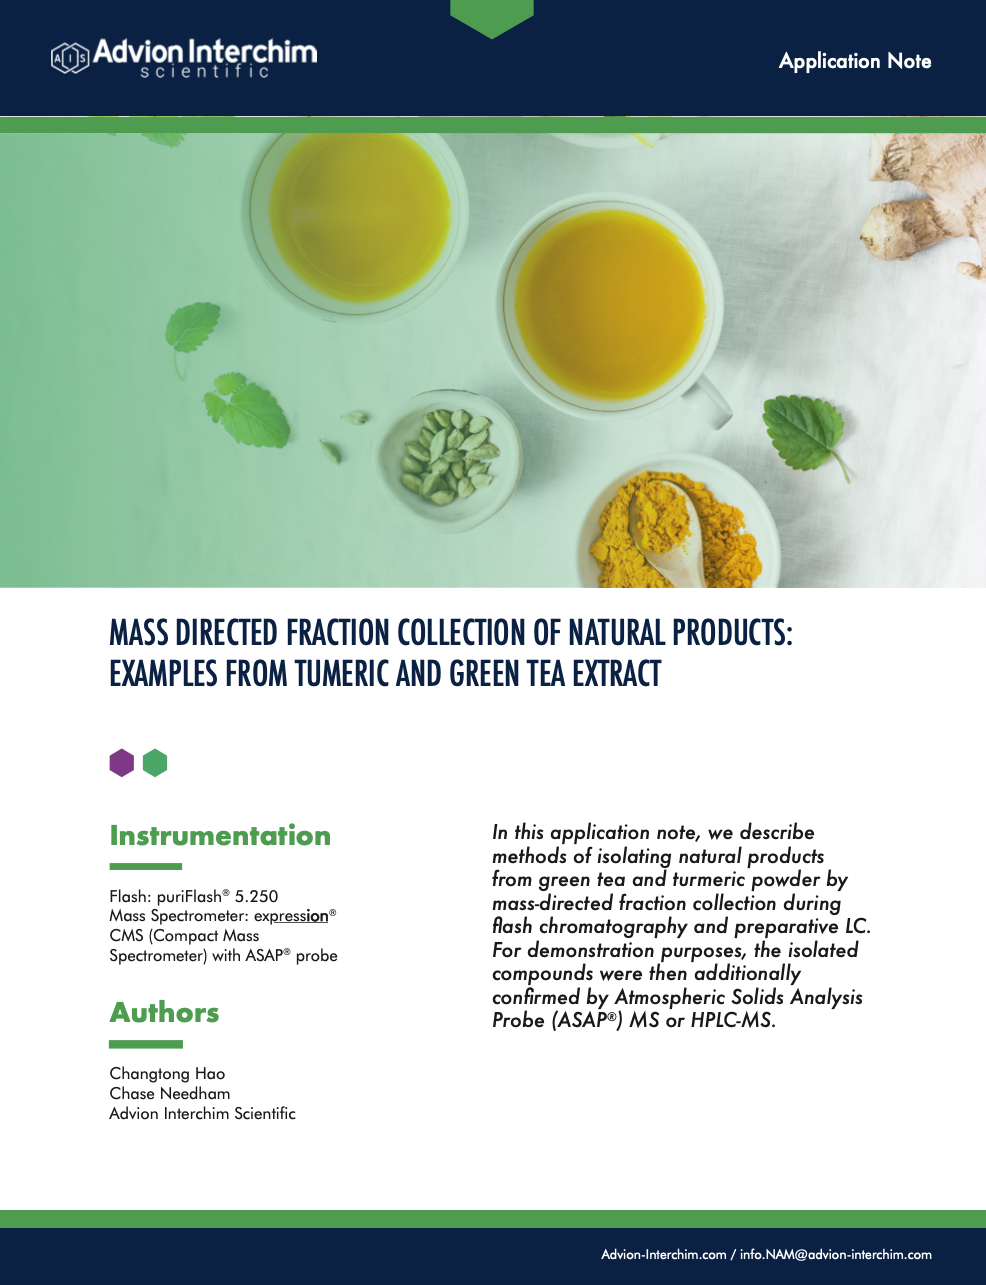 Mass Directed Fraction Collection of Natural Products: Examples from Turmeric and Green Tea Extract